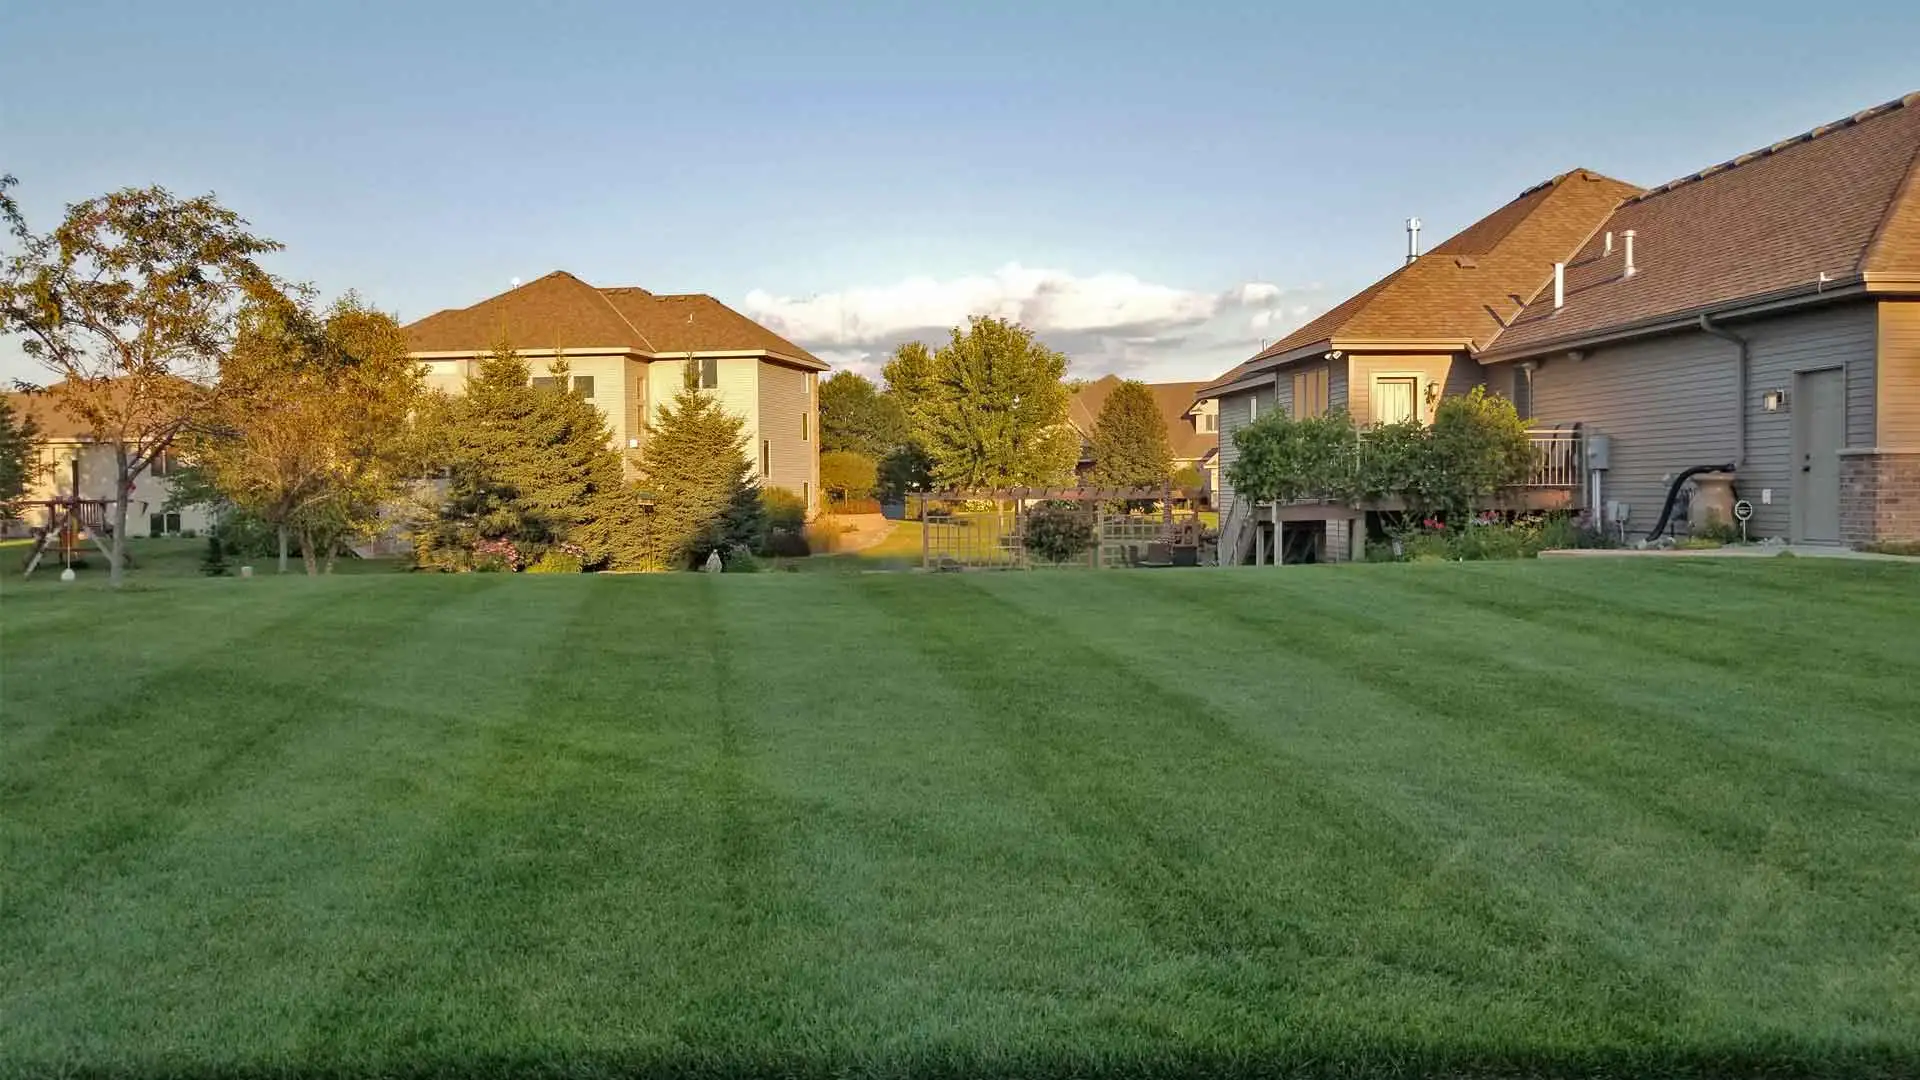 Home in Sartell, MN after professional mowing.